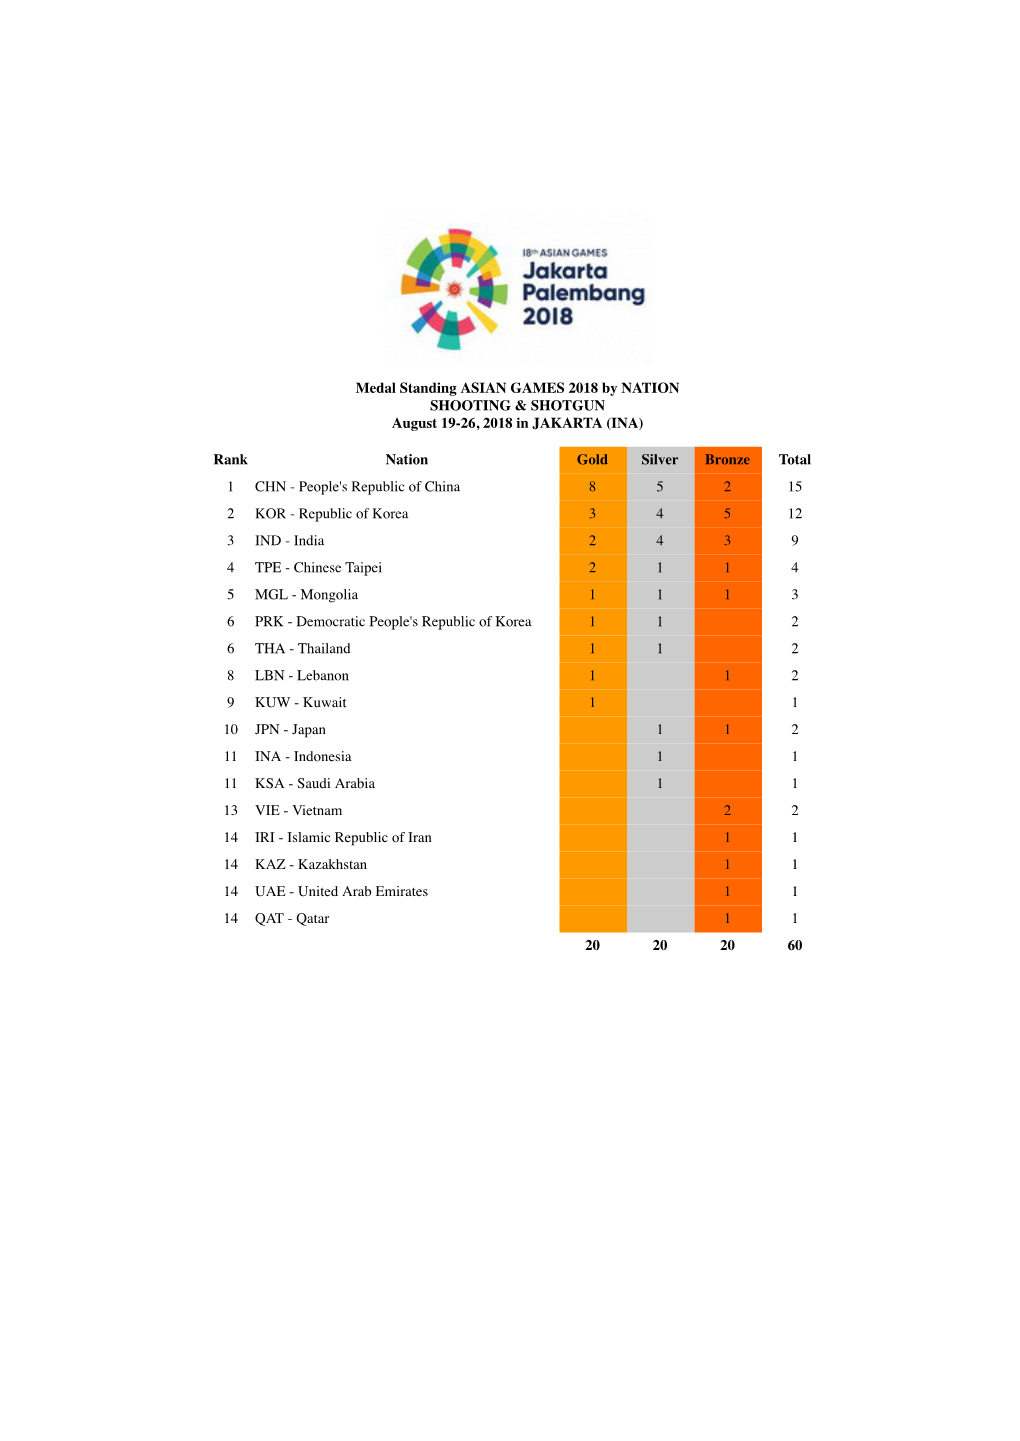 Complete Results of the Asian Games 2018 in Jakarta